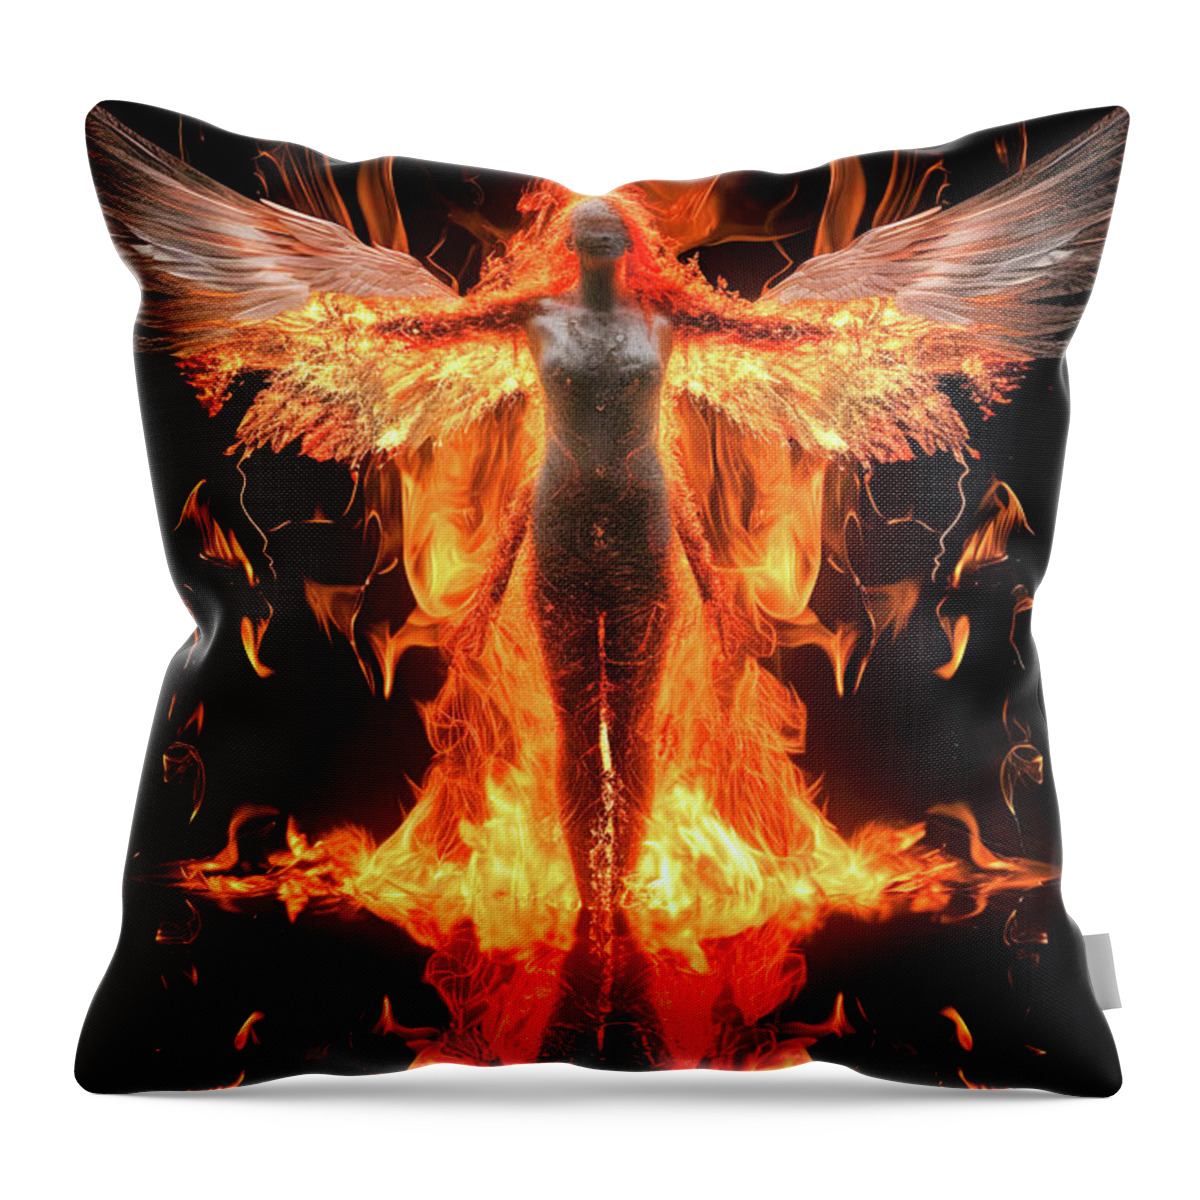 Angel Throw Pillow featuring the digital art Angel of Fire 01 by Matthias Hauser